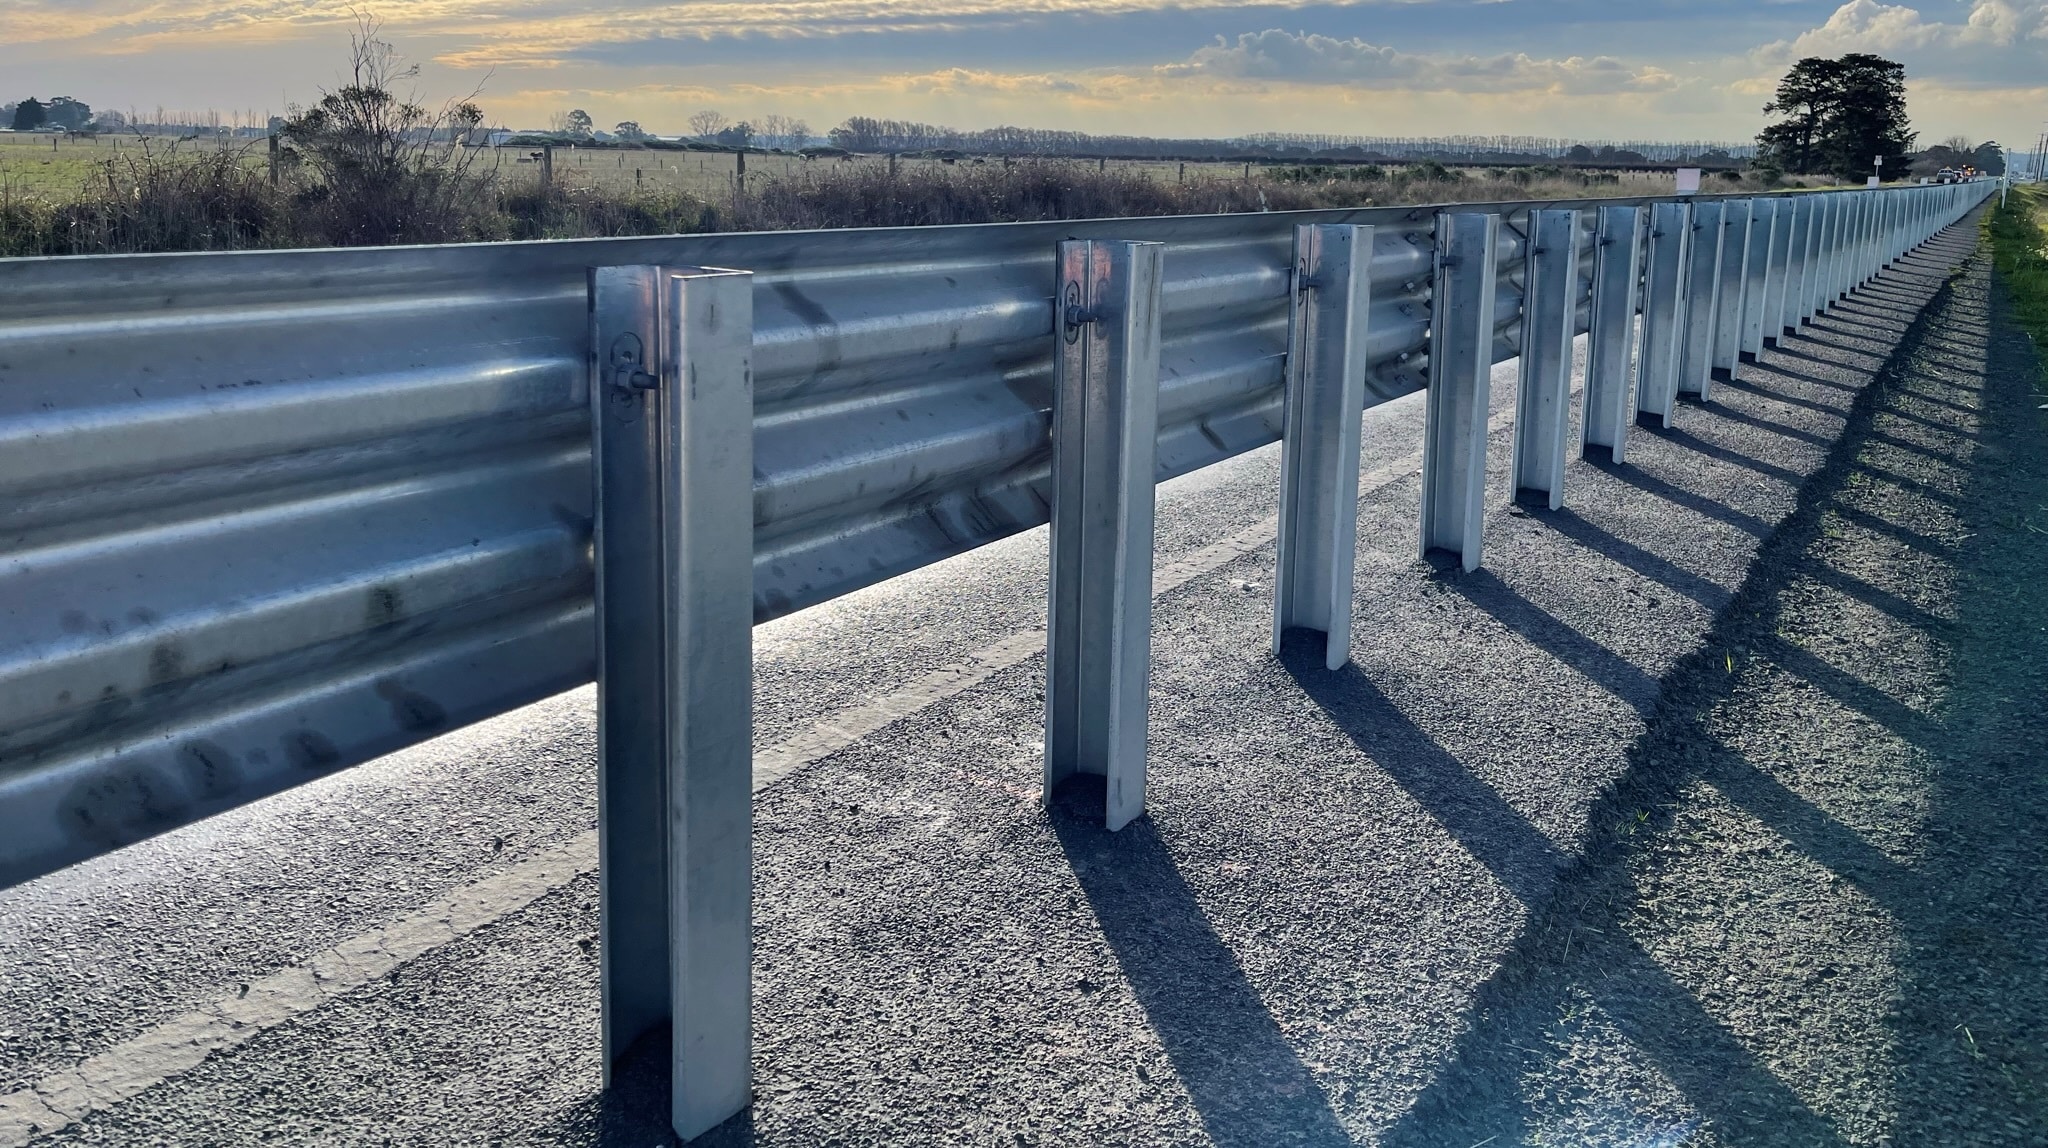 The introduction of MASH follows changes to the vehicle fleet, researching of real-life impact conditions and updated criteria for evaluating barrier performance. All Australian State Road Agencies have mandated MASH compliance for new road barrier installations.